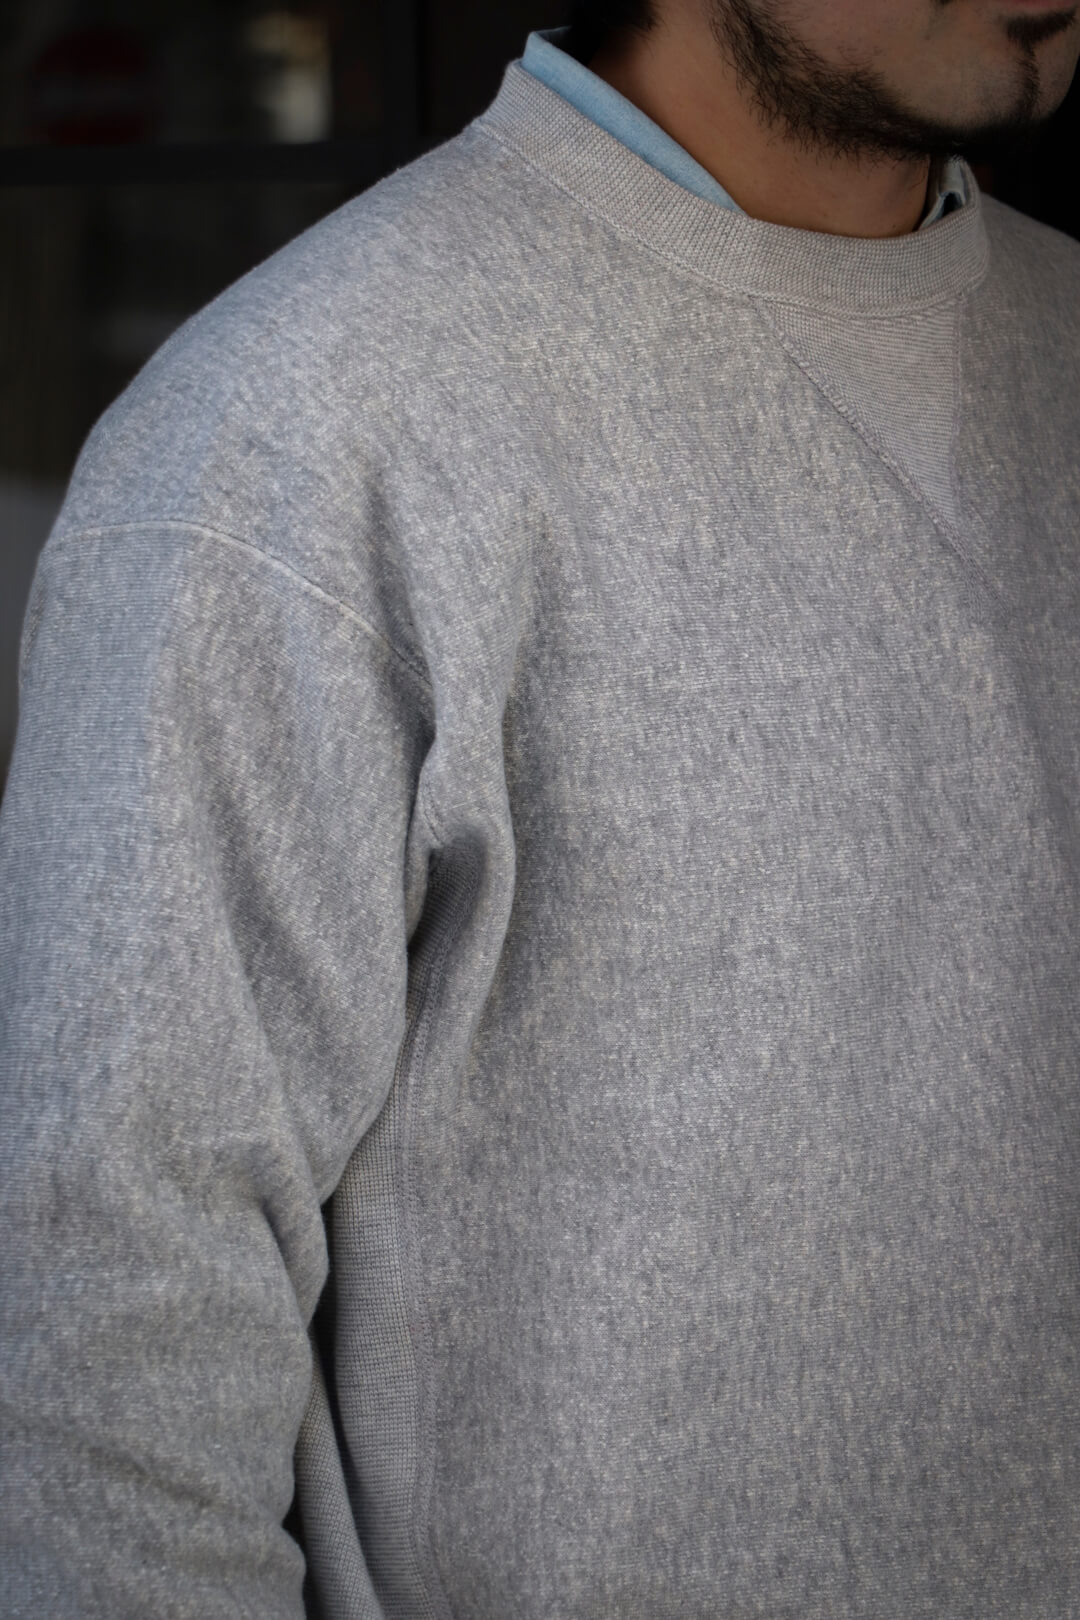 CREW SWEAT SHIRT - ARCH EXCLUSIVE -